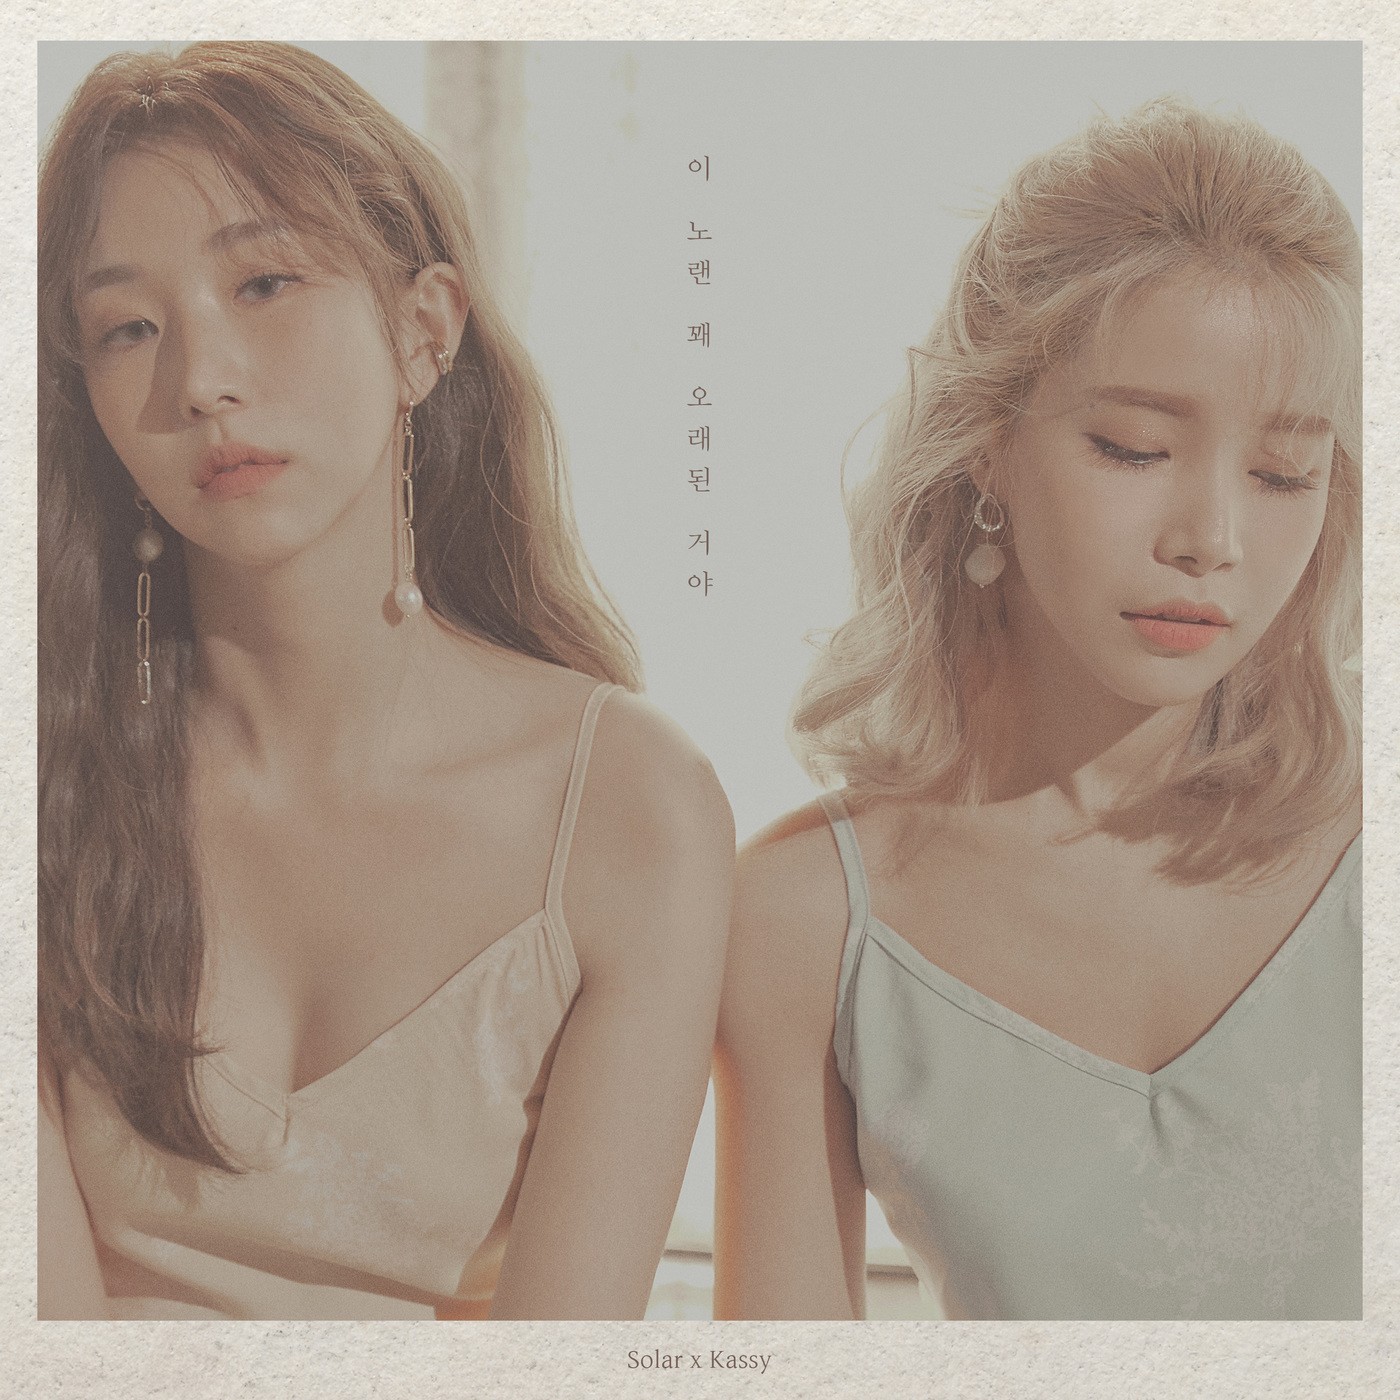 [Single] Solar, Kassy (솔라, 케이시) – A song from the past (이 노랜 꽤 오래된 거야) [FLAC + MP3 320 / WEB] [2020.01.16]